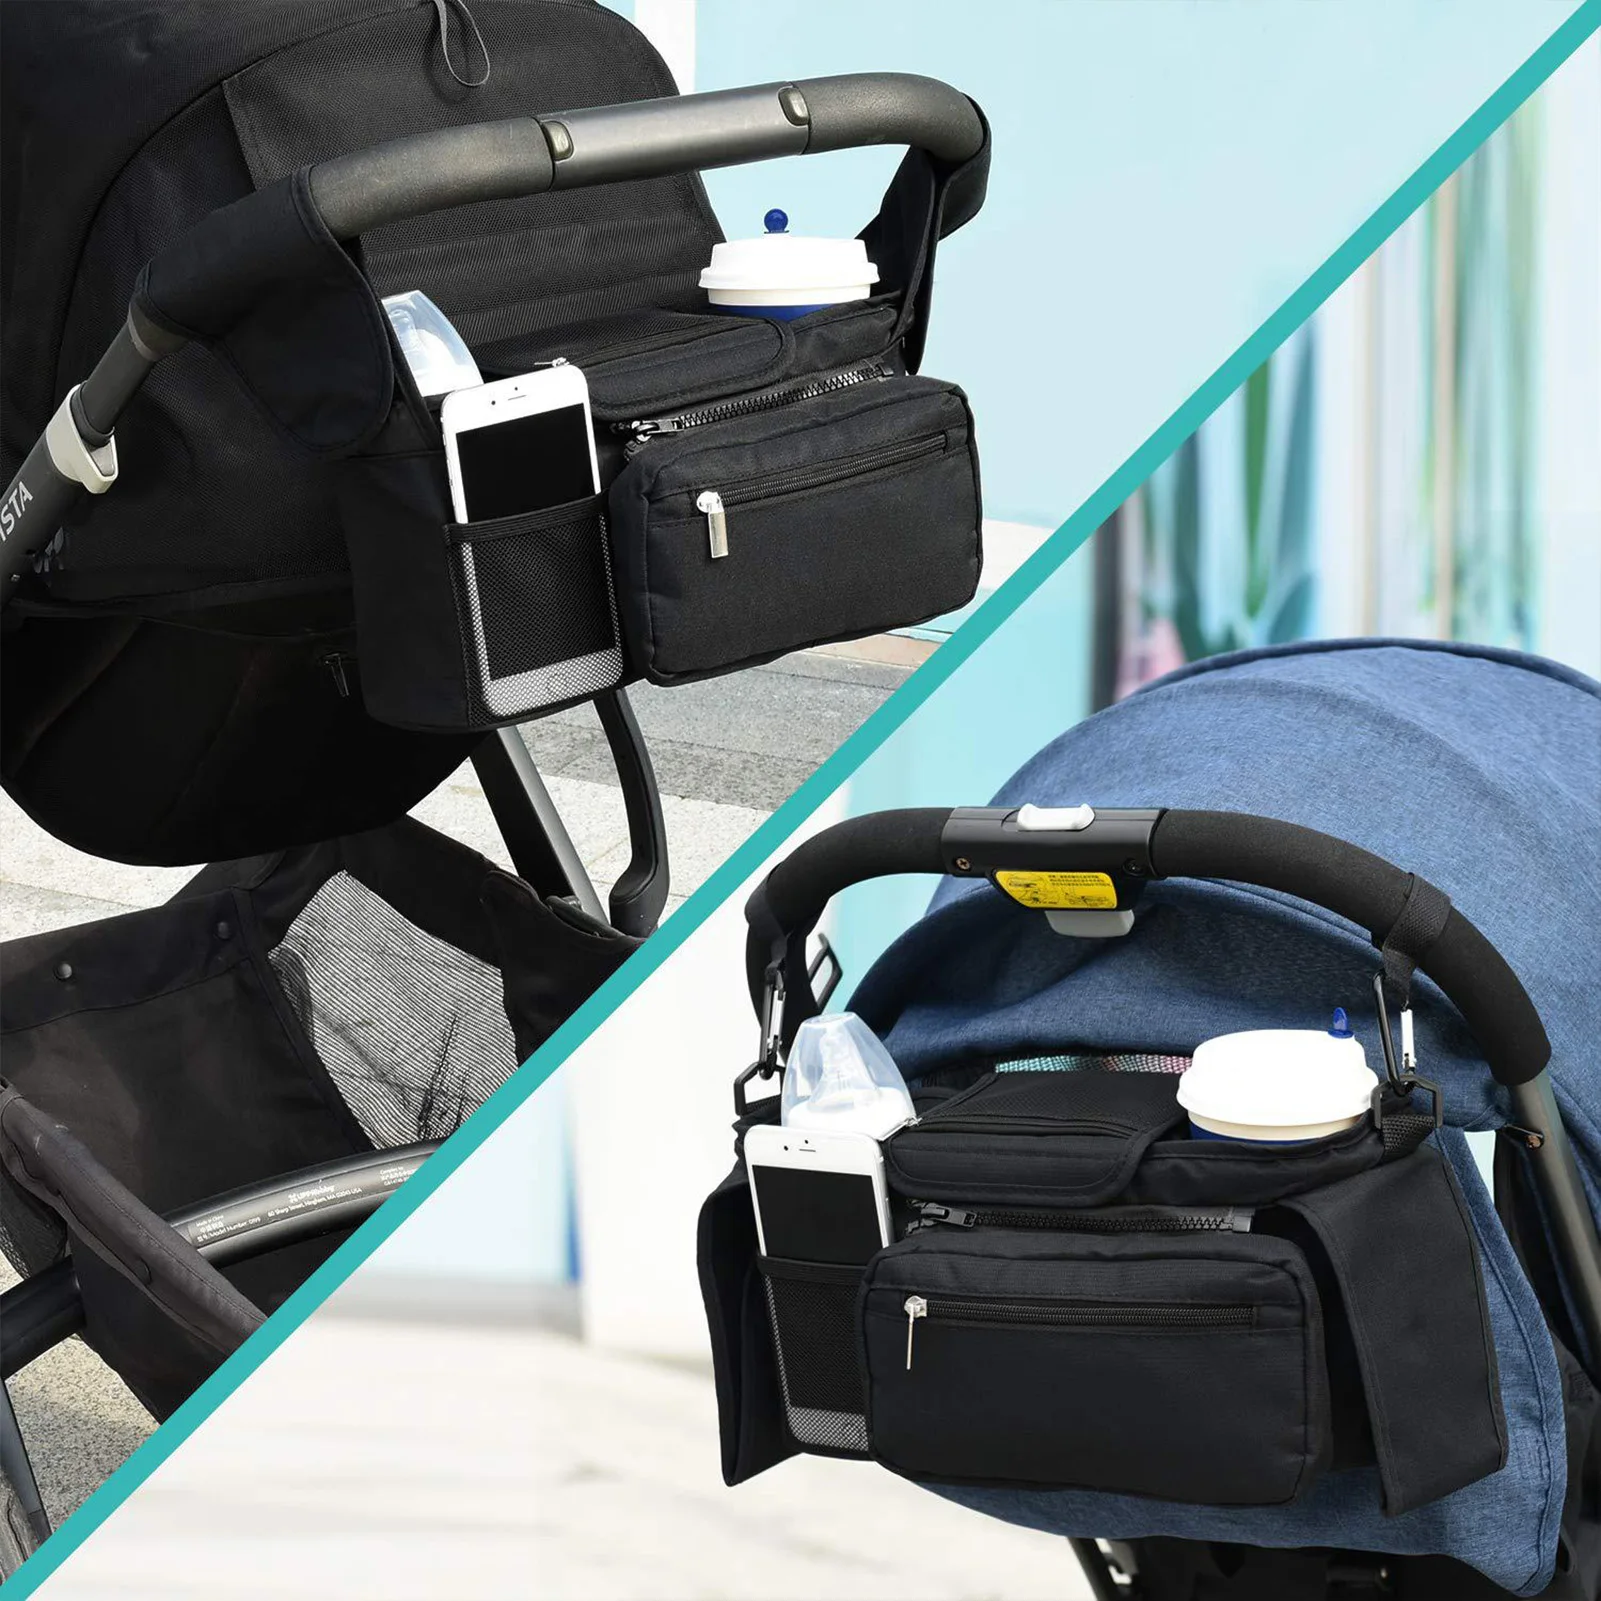 

Universal Stroller Organizer Bag with Cup Holder Detachable Phone Bag and Shoulder Strap Suitable for Toddler Outdoor